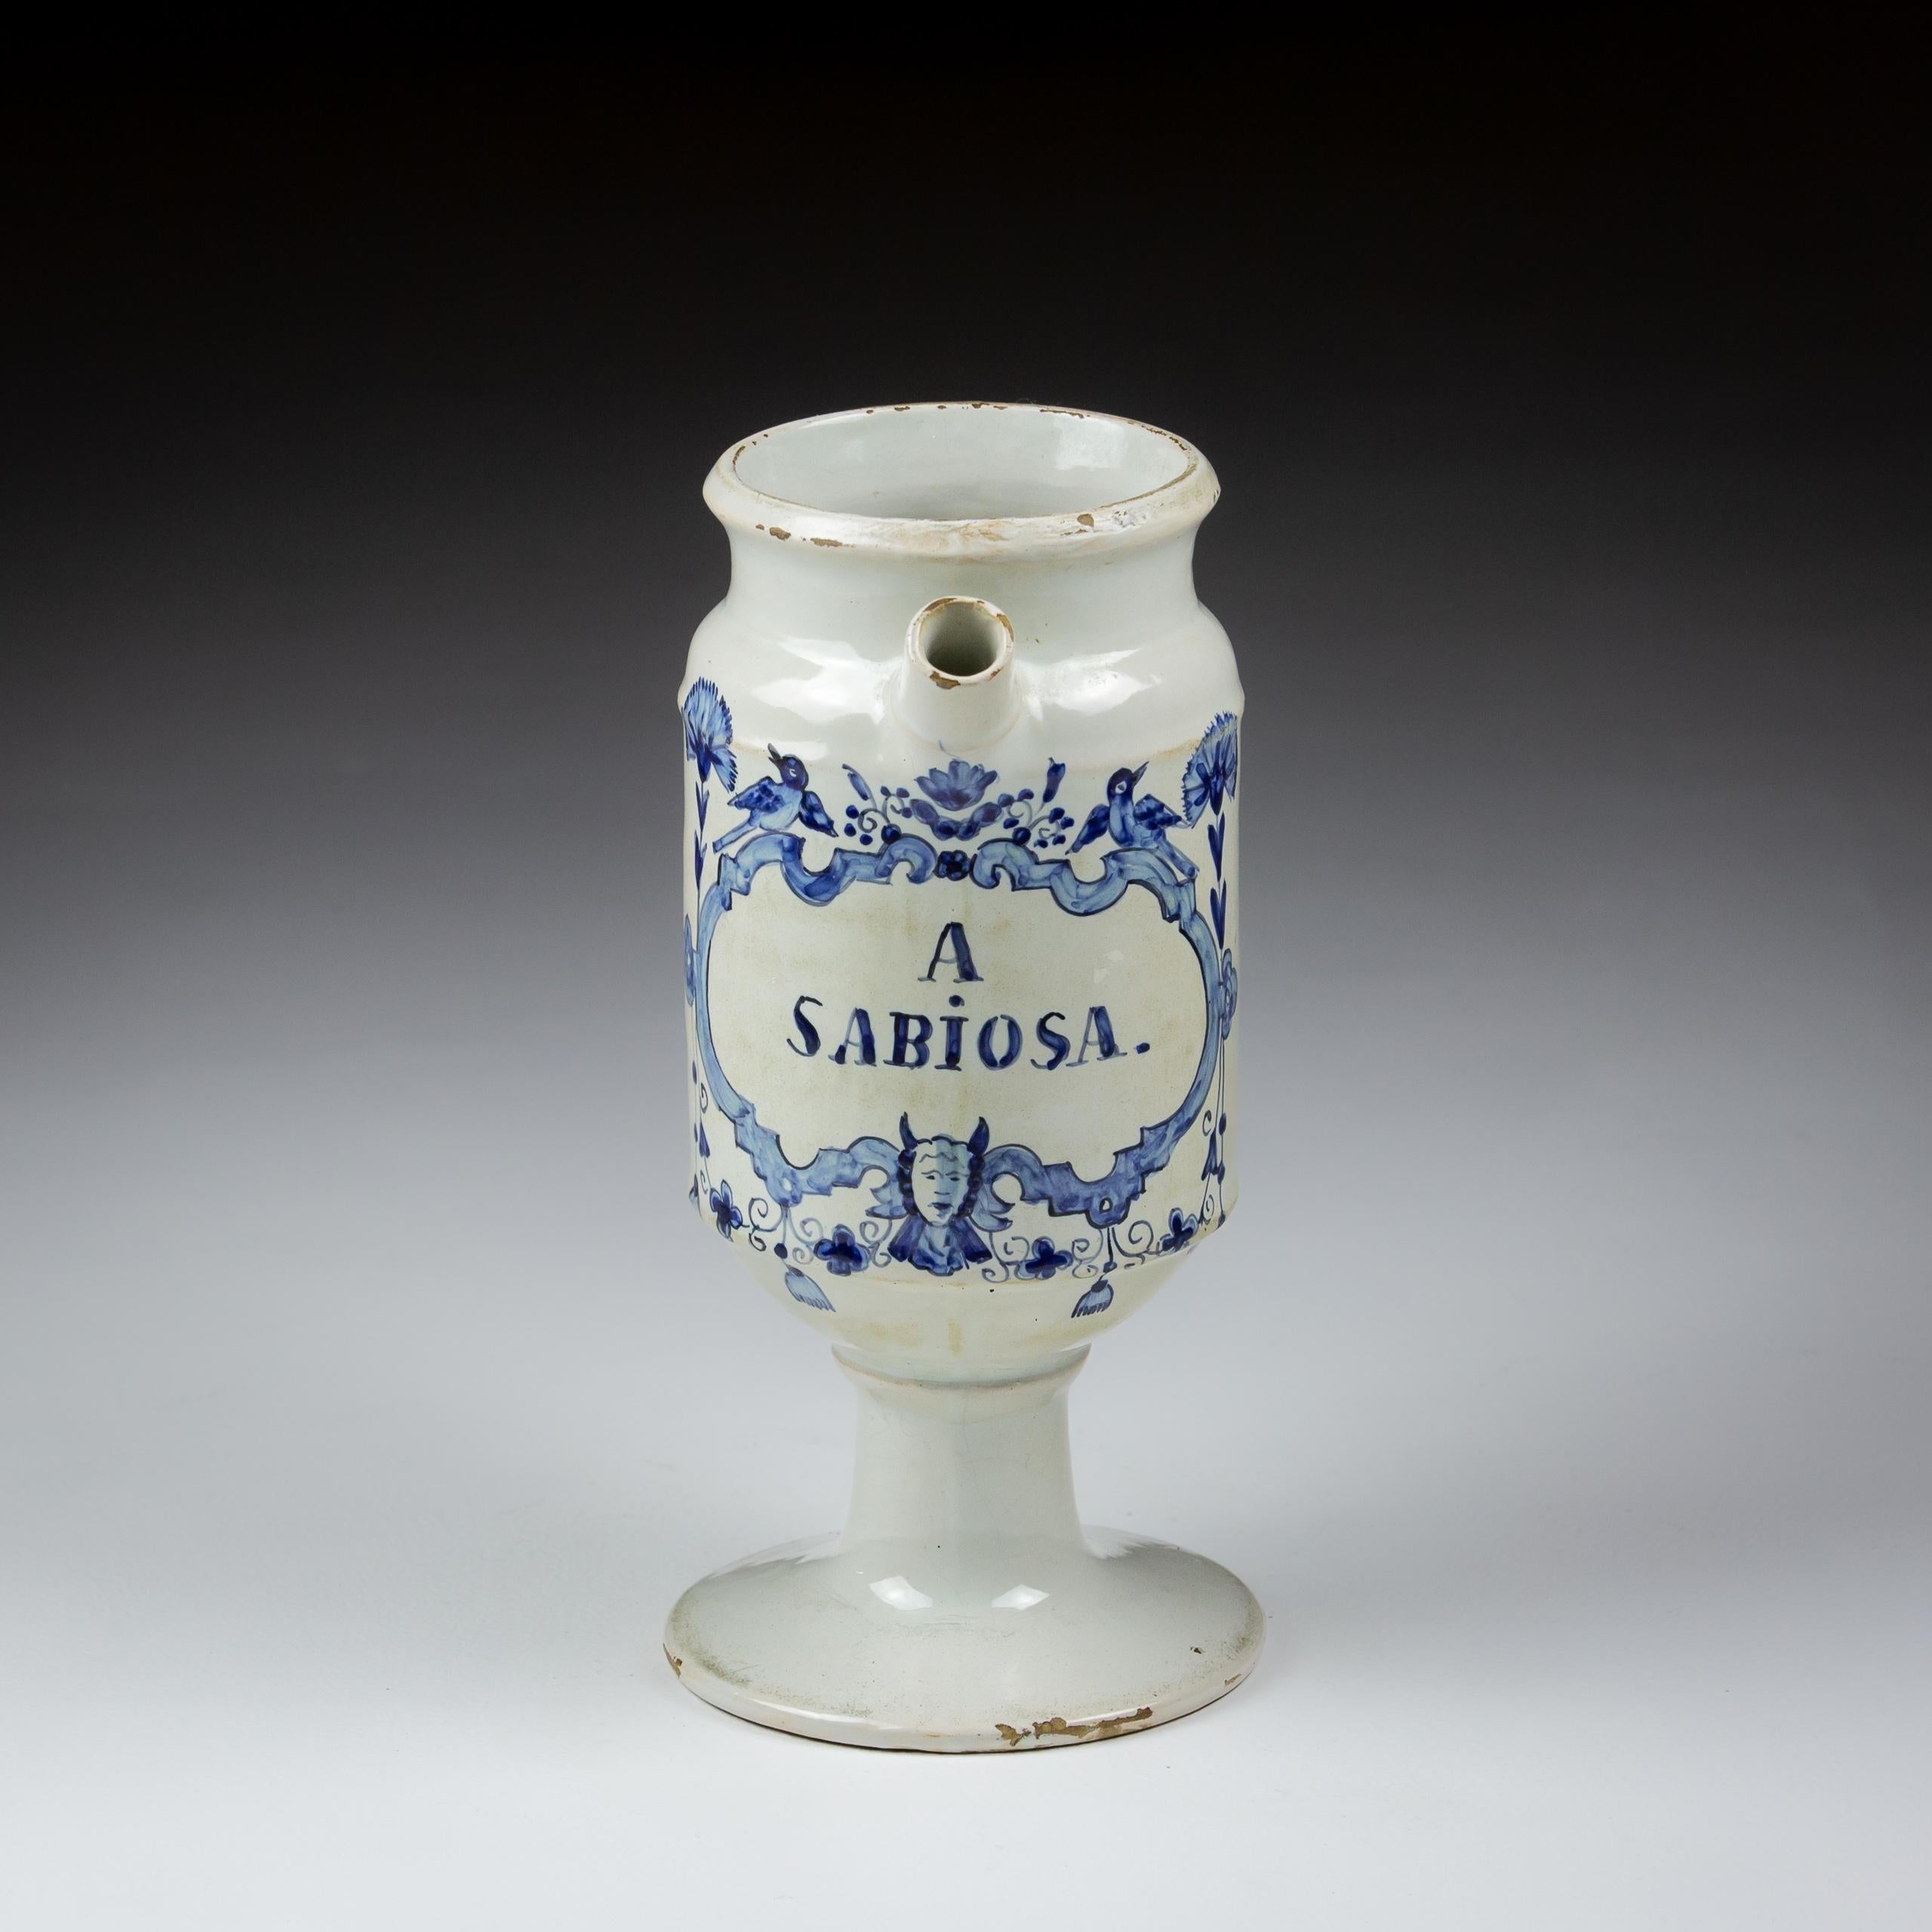 18th Century Wet Drug Jar, with spout and handle in remarkable condition. Named A Sabiosa. Dutch, Circa 1780.